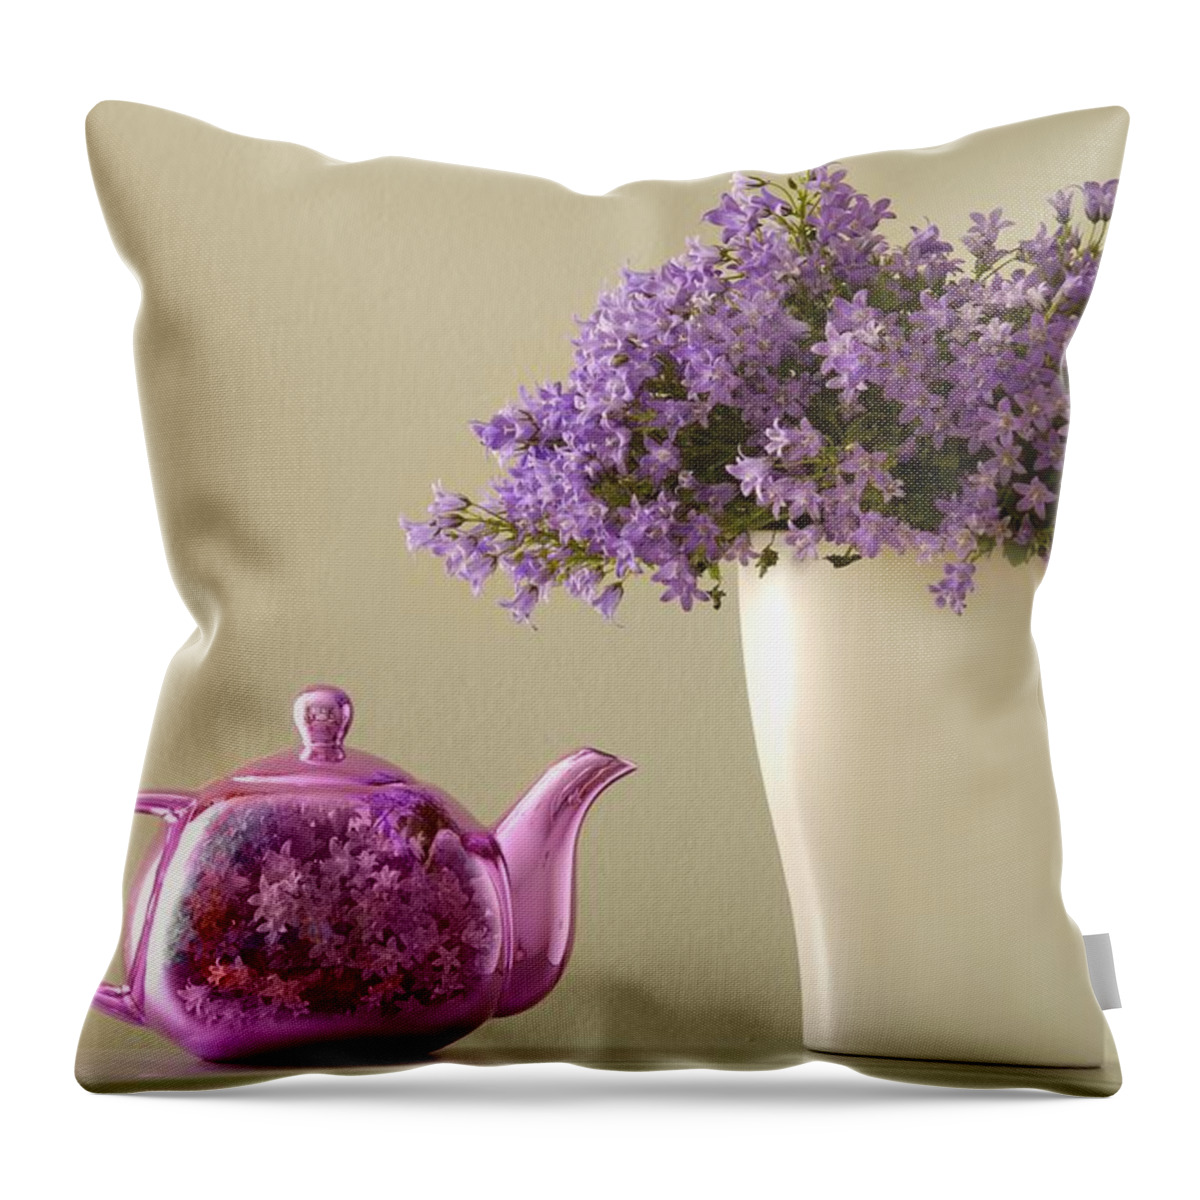 Blossom Throw Pillow featuring the photograph Teapot And Flowers In A Vase by Ben Welsh